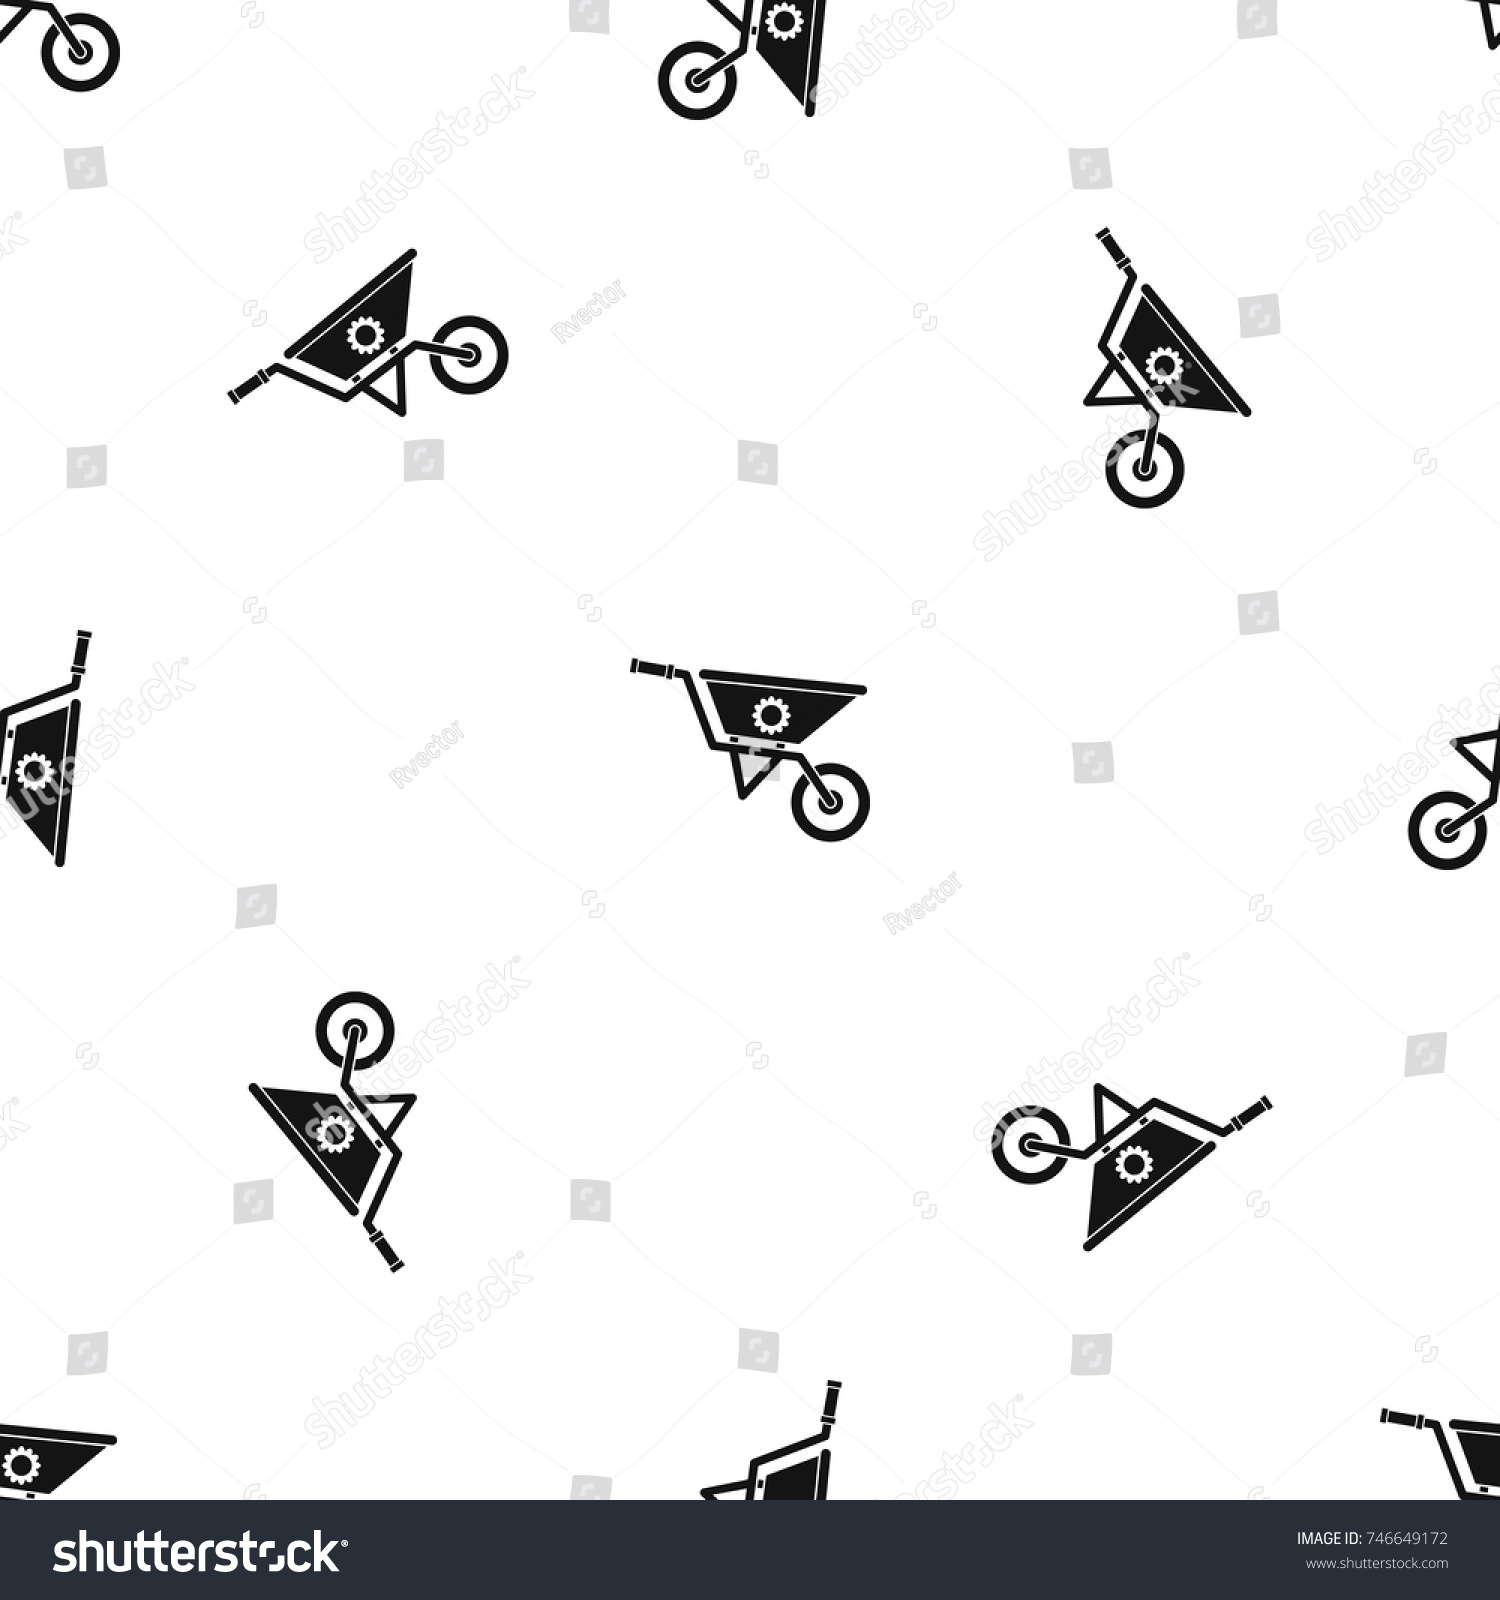 SVG of Wheelbarrow pattern repeat seamless in black color for any design. Vector geometric illustration svg